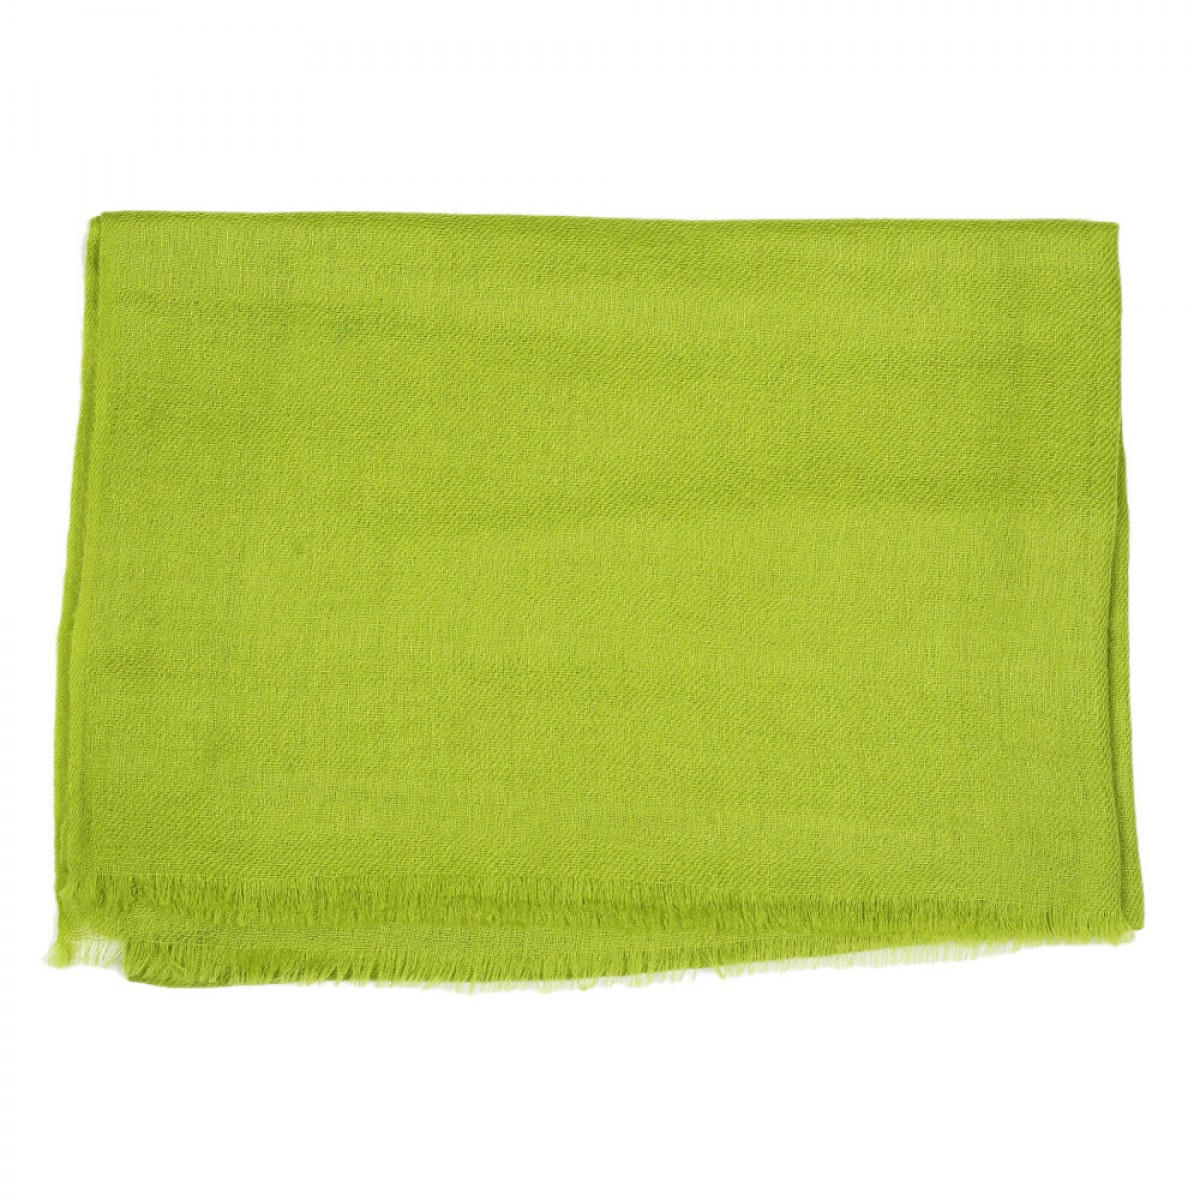 Sheer Pashmina Stole - Spring Sprout Green